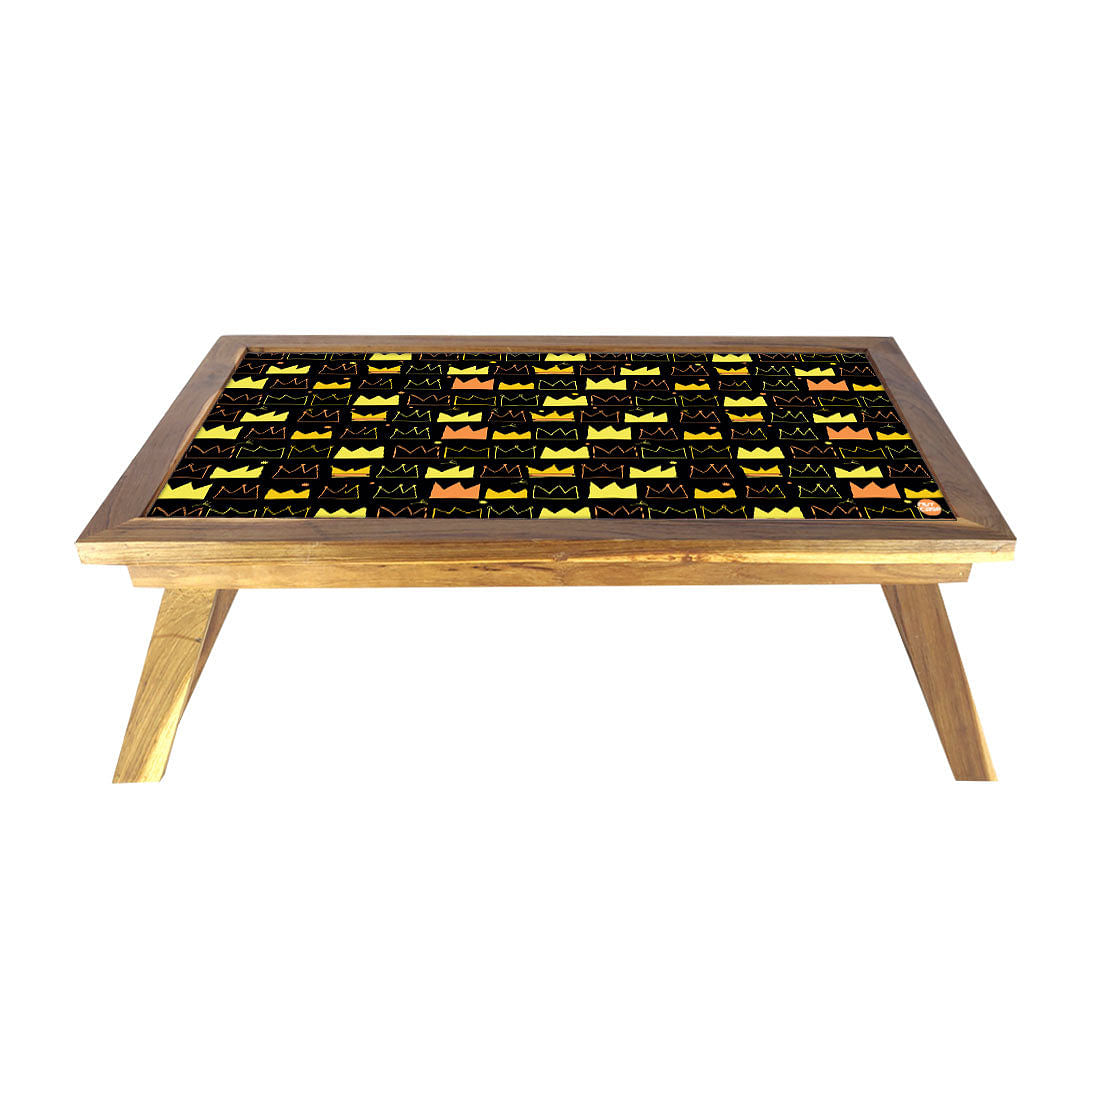 Folding Breakfast Bed Table Lapdesk For Home Nutcase